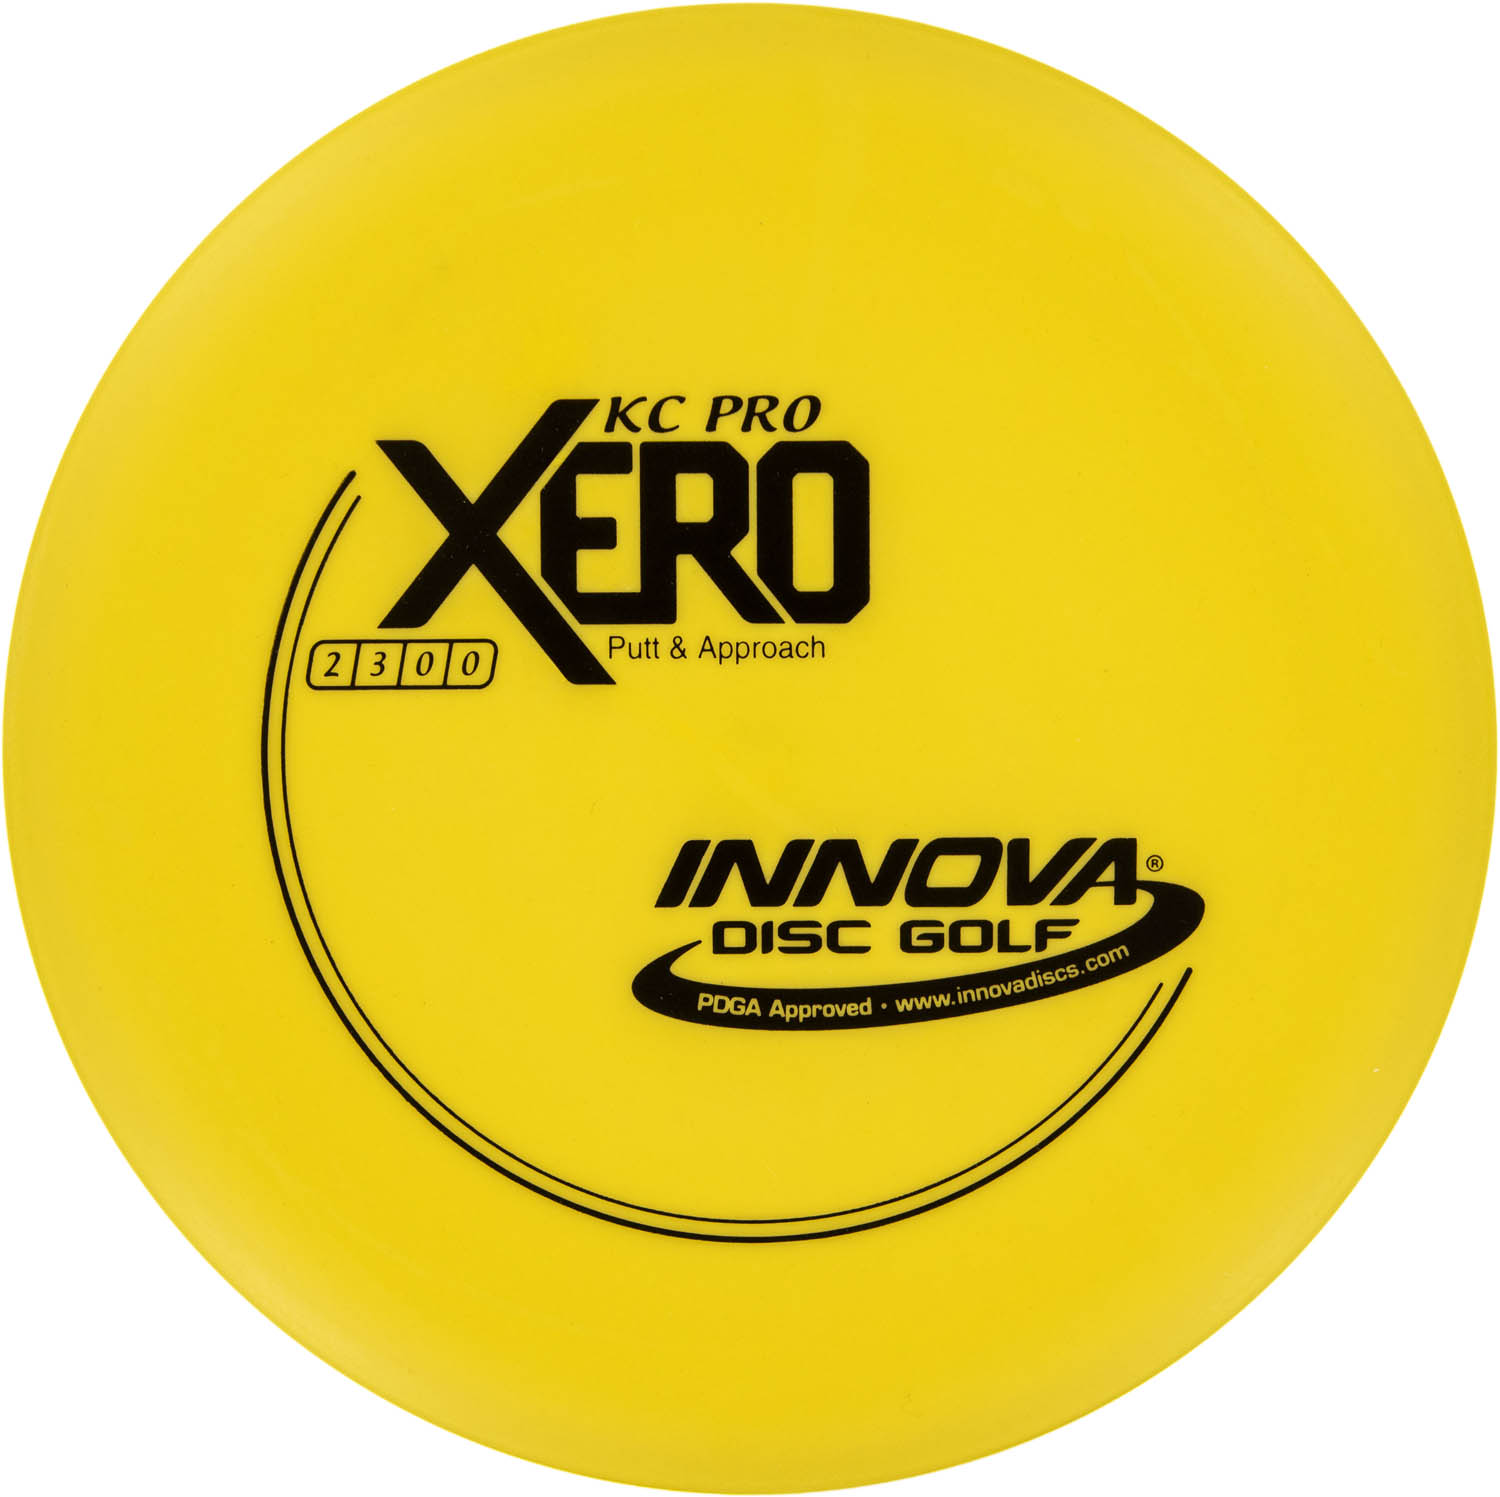 KC Pro Xero from Disc Golf United